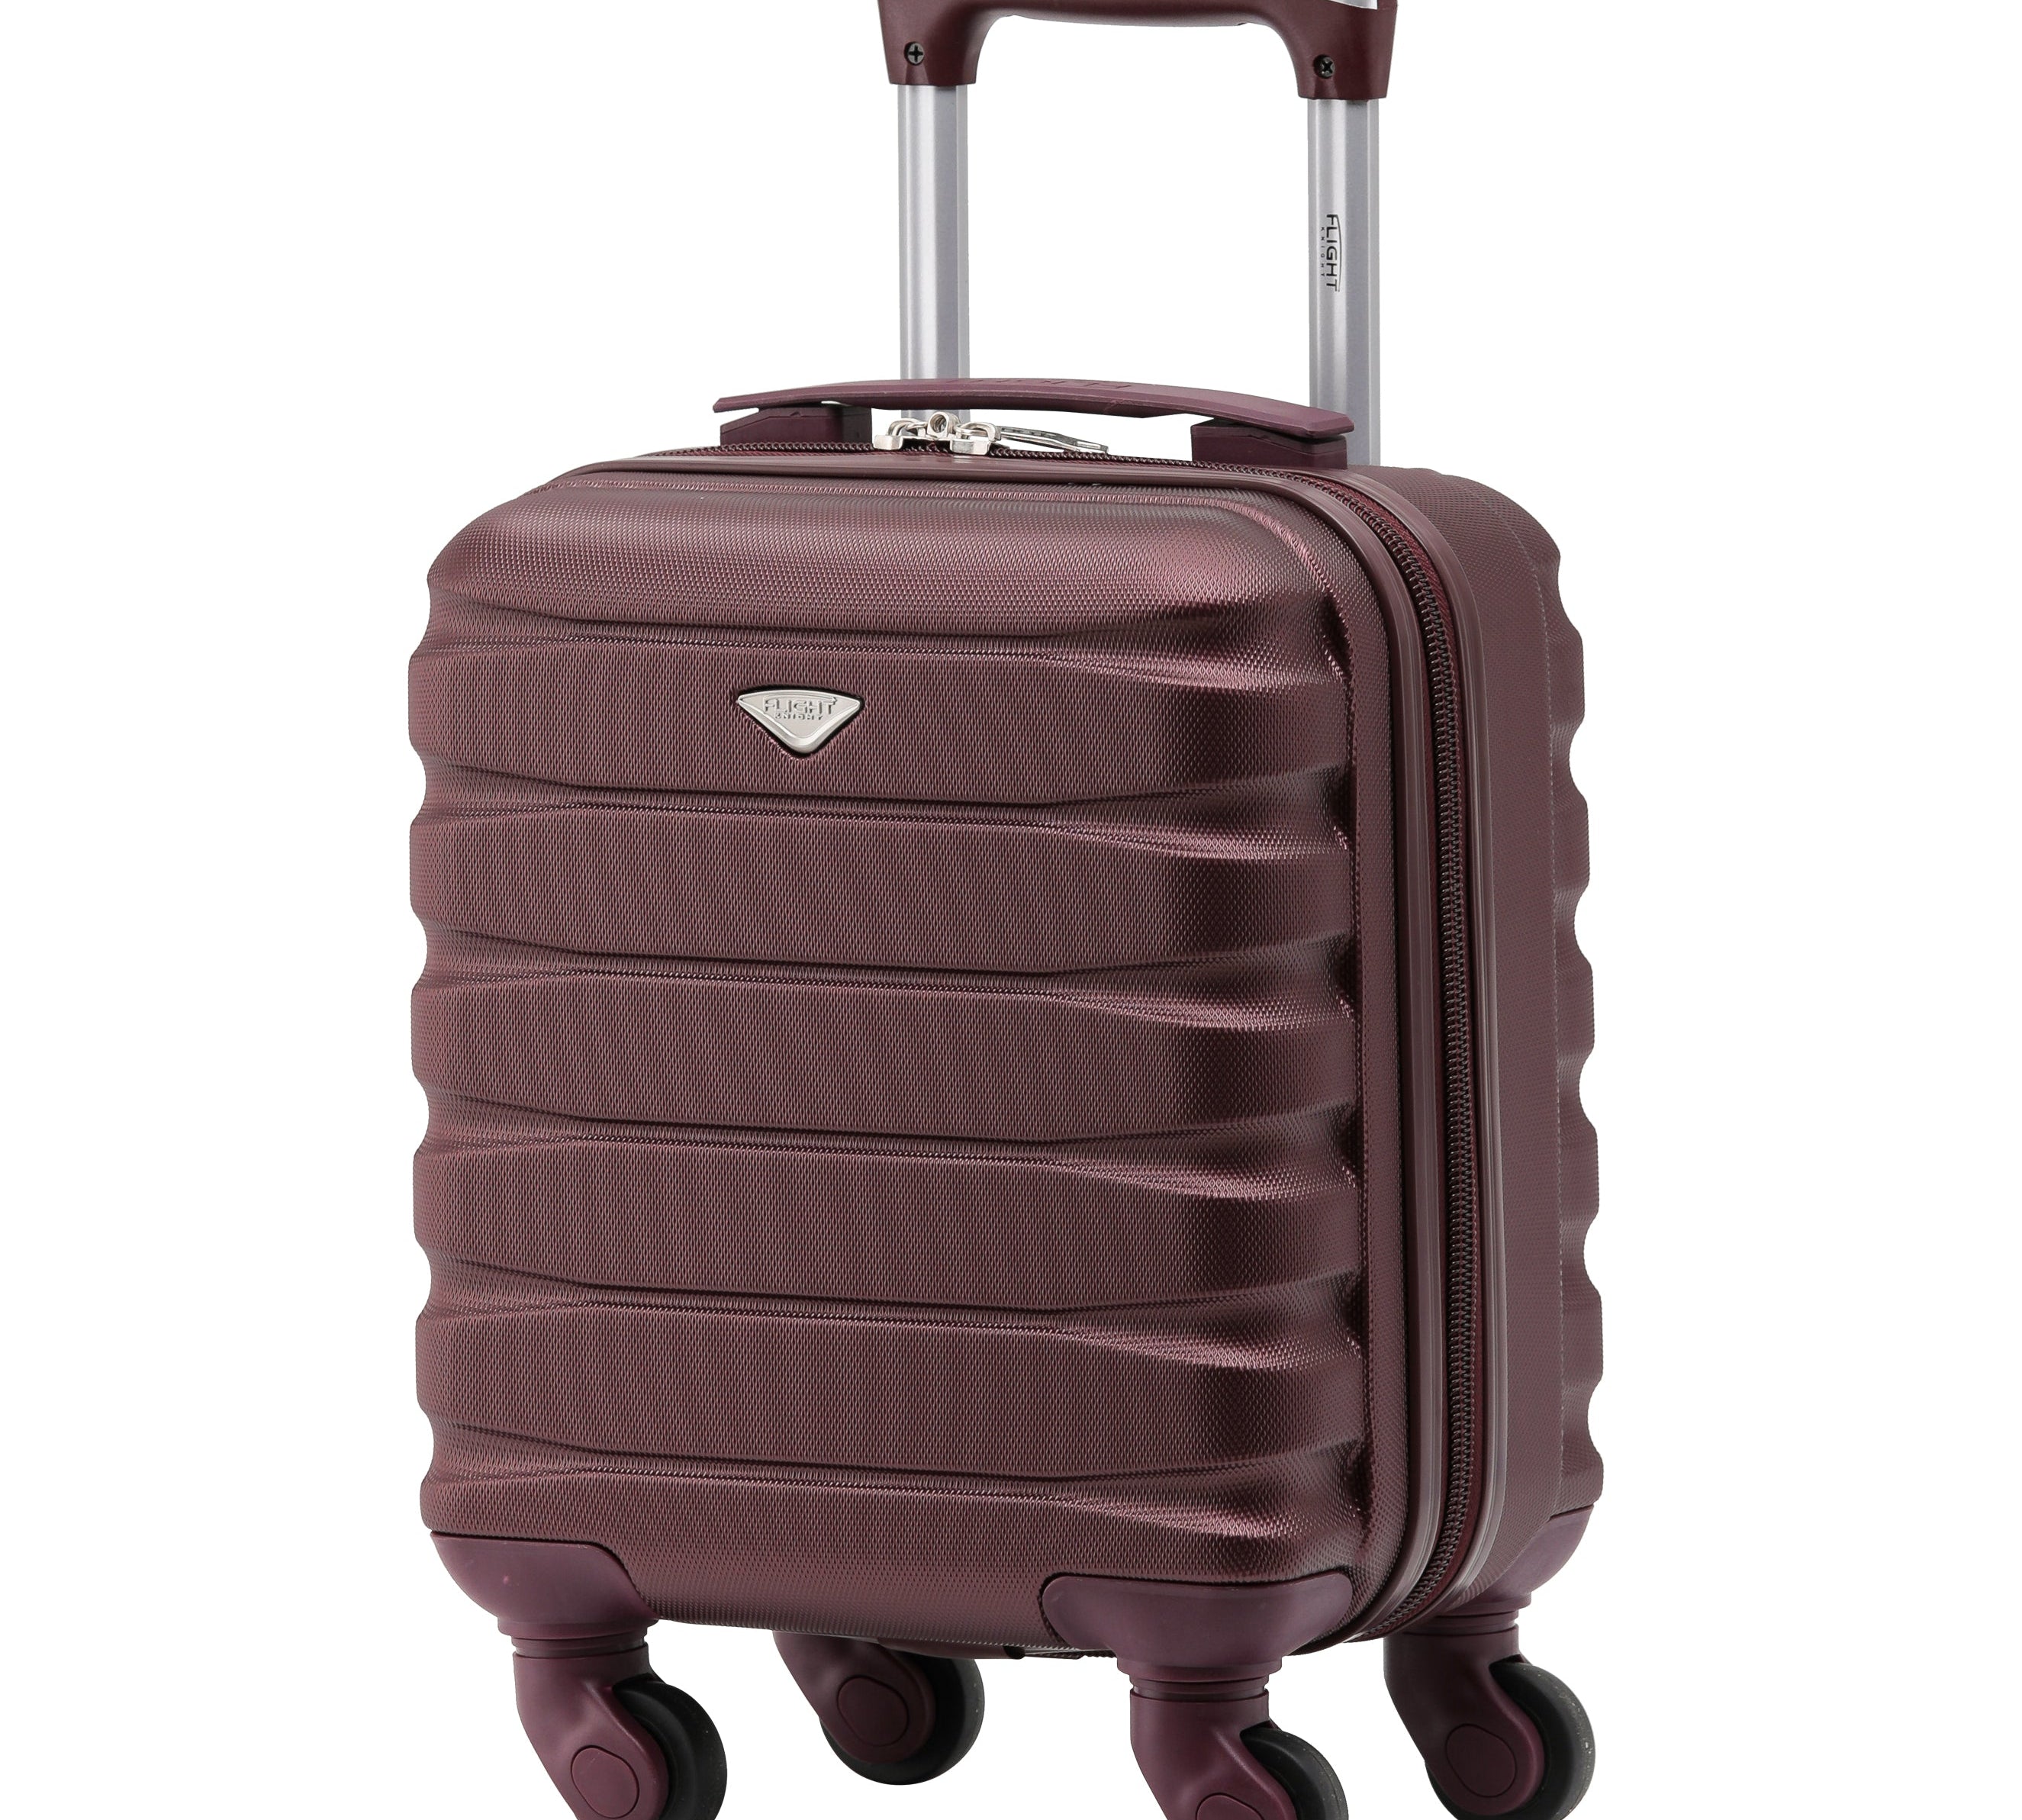 Lightweight 4 Wheel ABS Hard Case Suitcases Cabin Carry On Hand Luggage Approved for Over 100 Airlines Including easyJet & Maximum Size for Vueling & Wizz Air 40x30x20cm